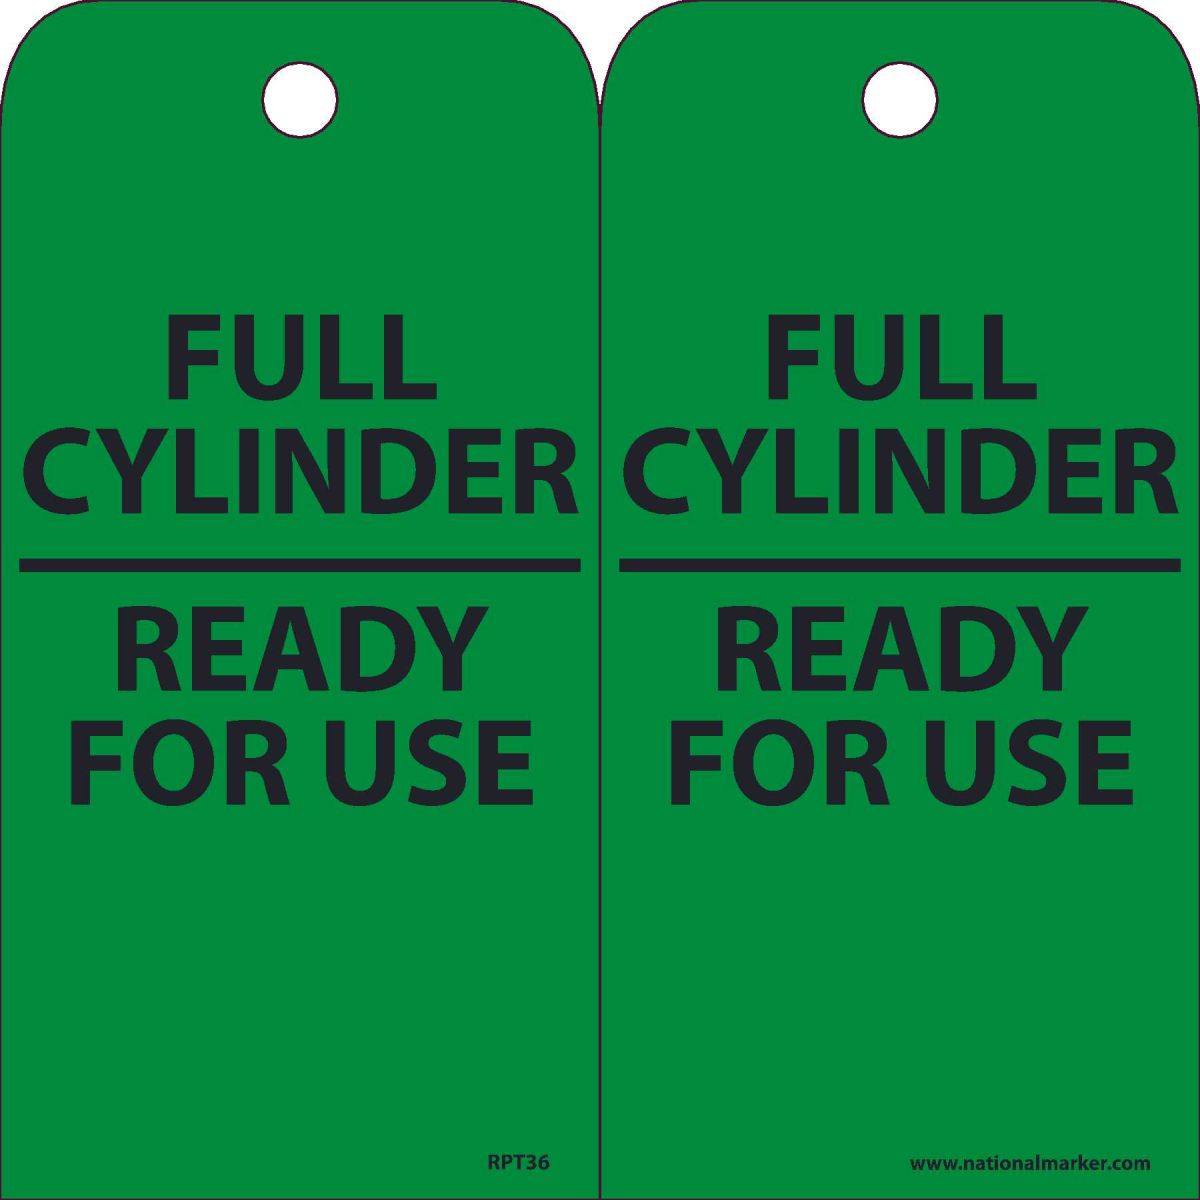 FULL CYLINDER READY FOR USE